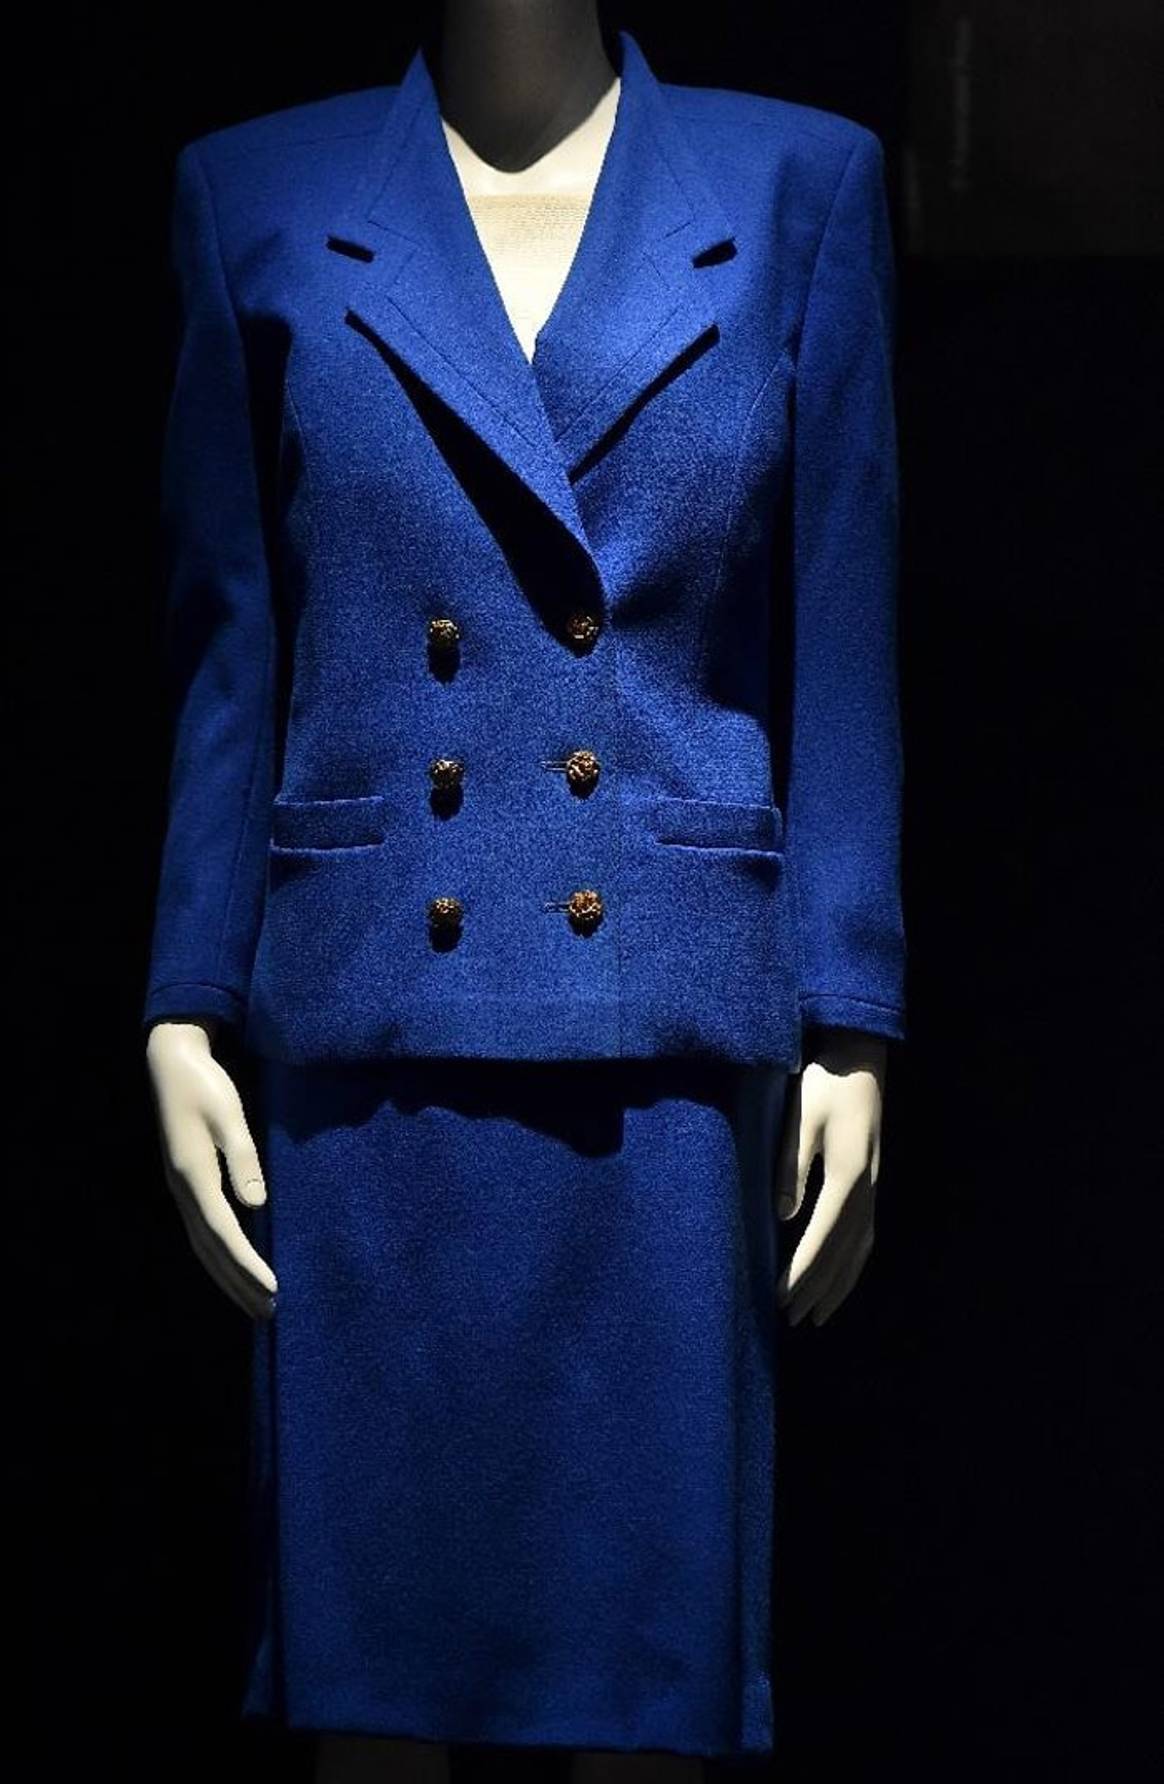 Thatcher's passion for fashion on show ahead of UK sale